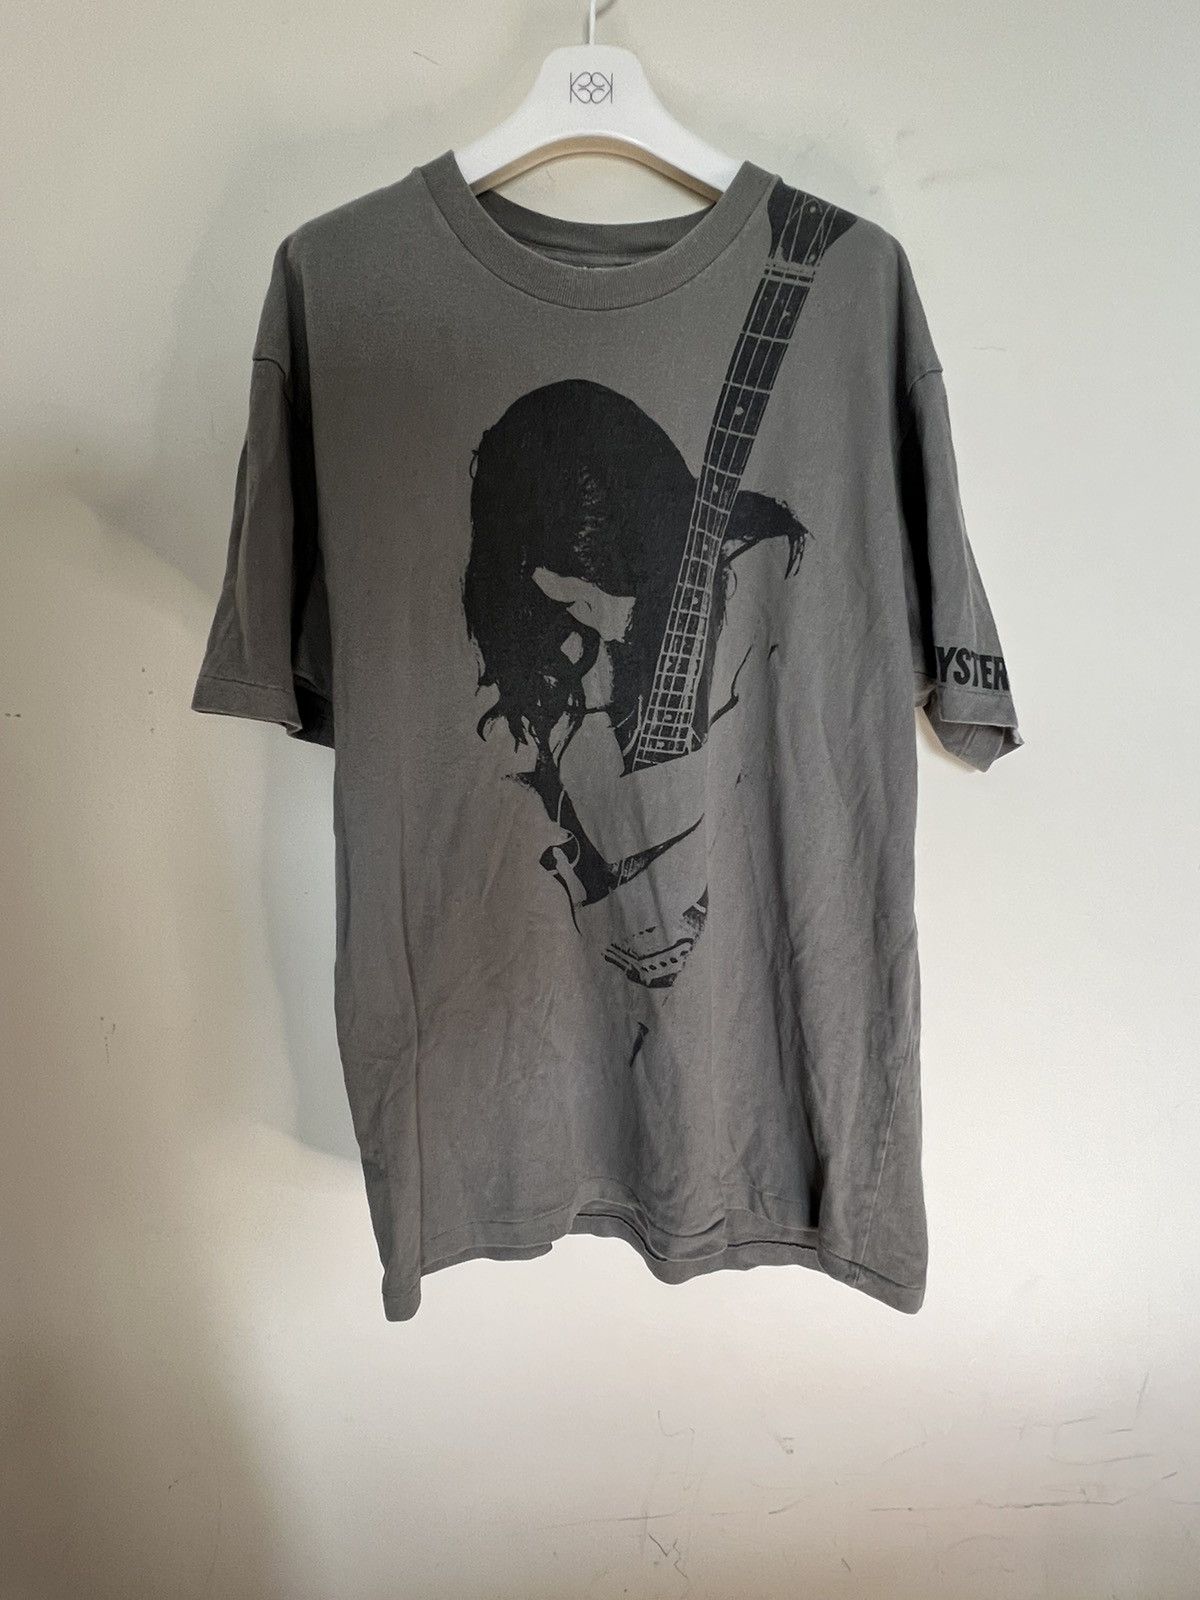 Hysteric Glamour Hysteric Glamour “Guitar Girl” Tee | Grailed